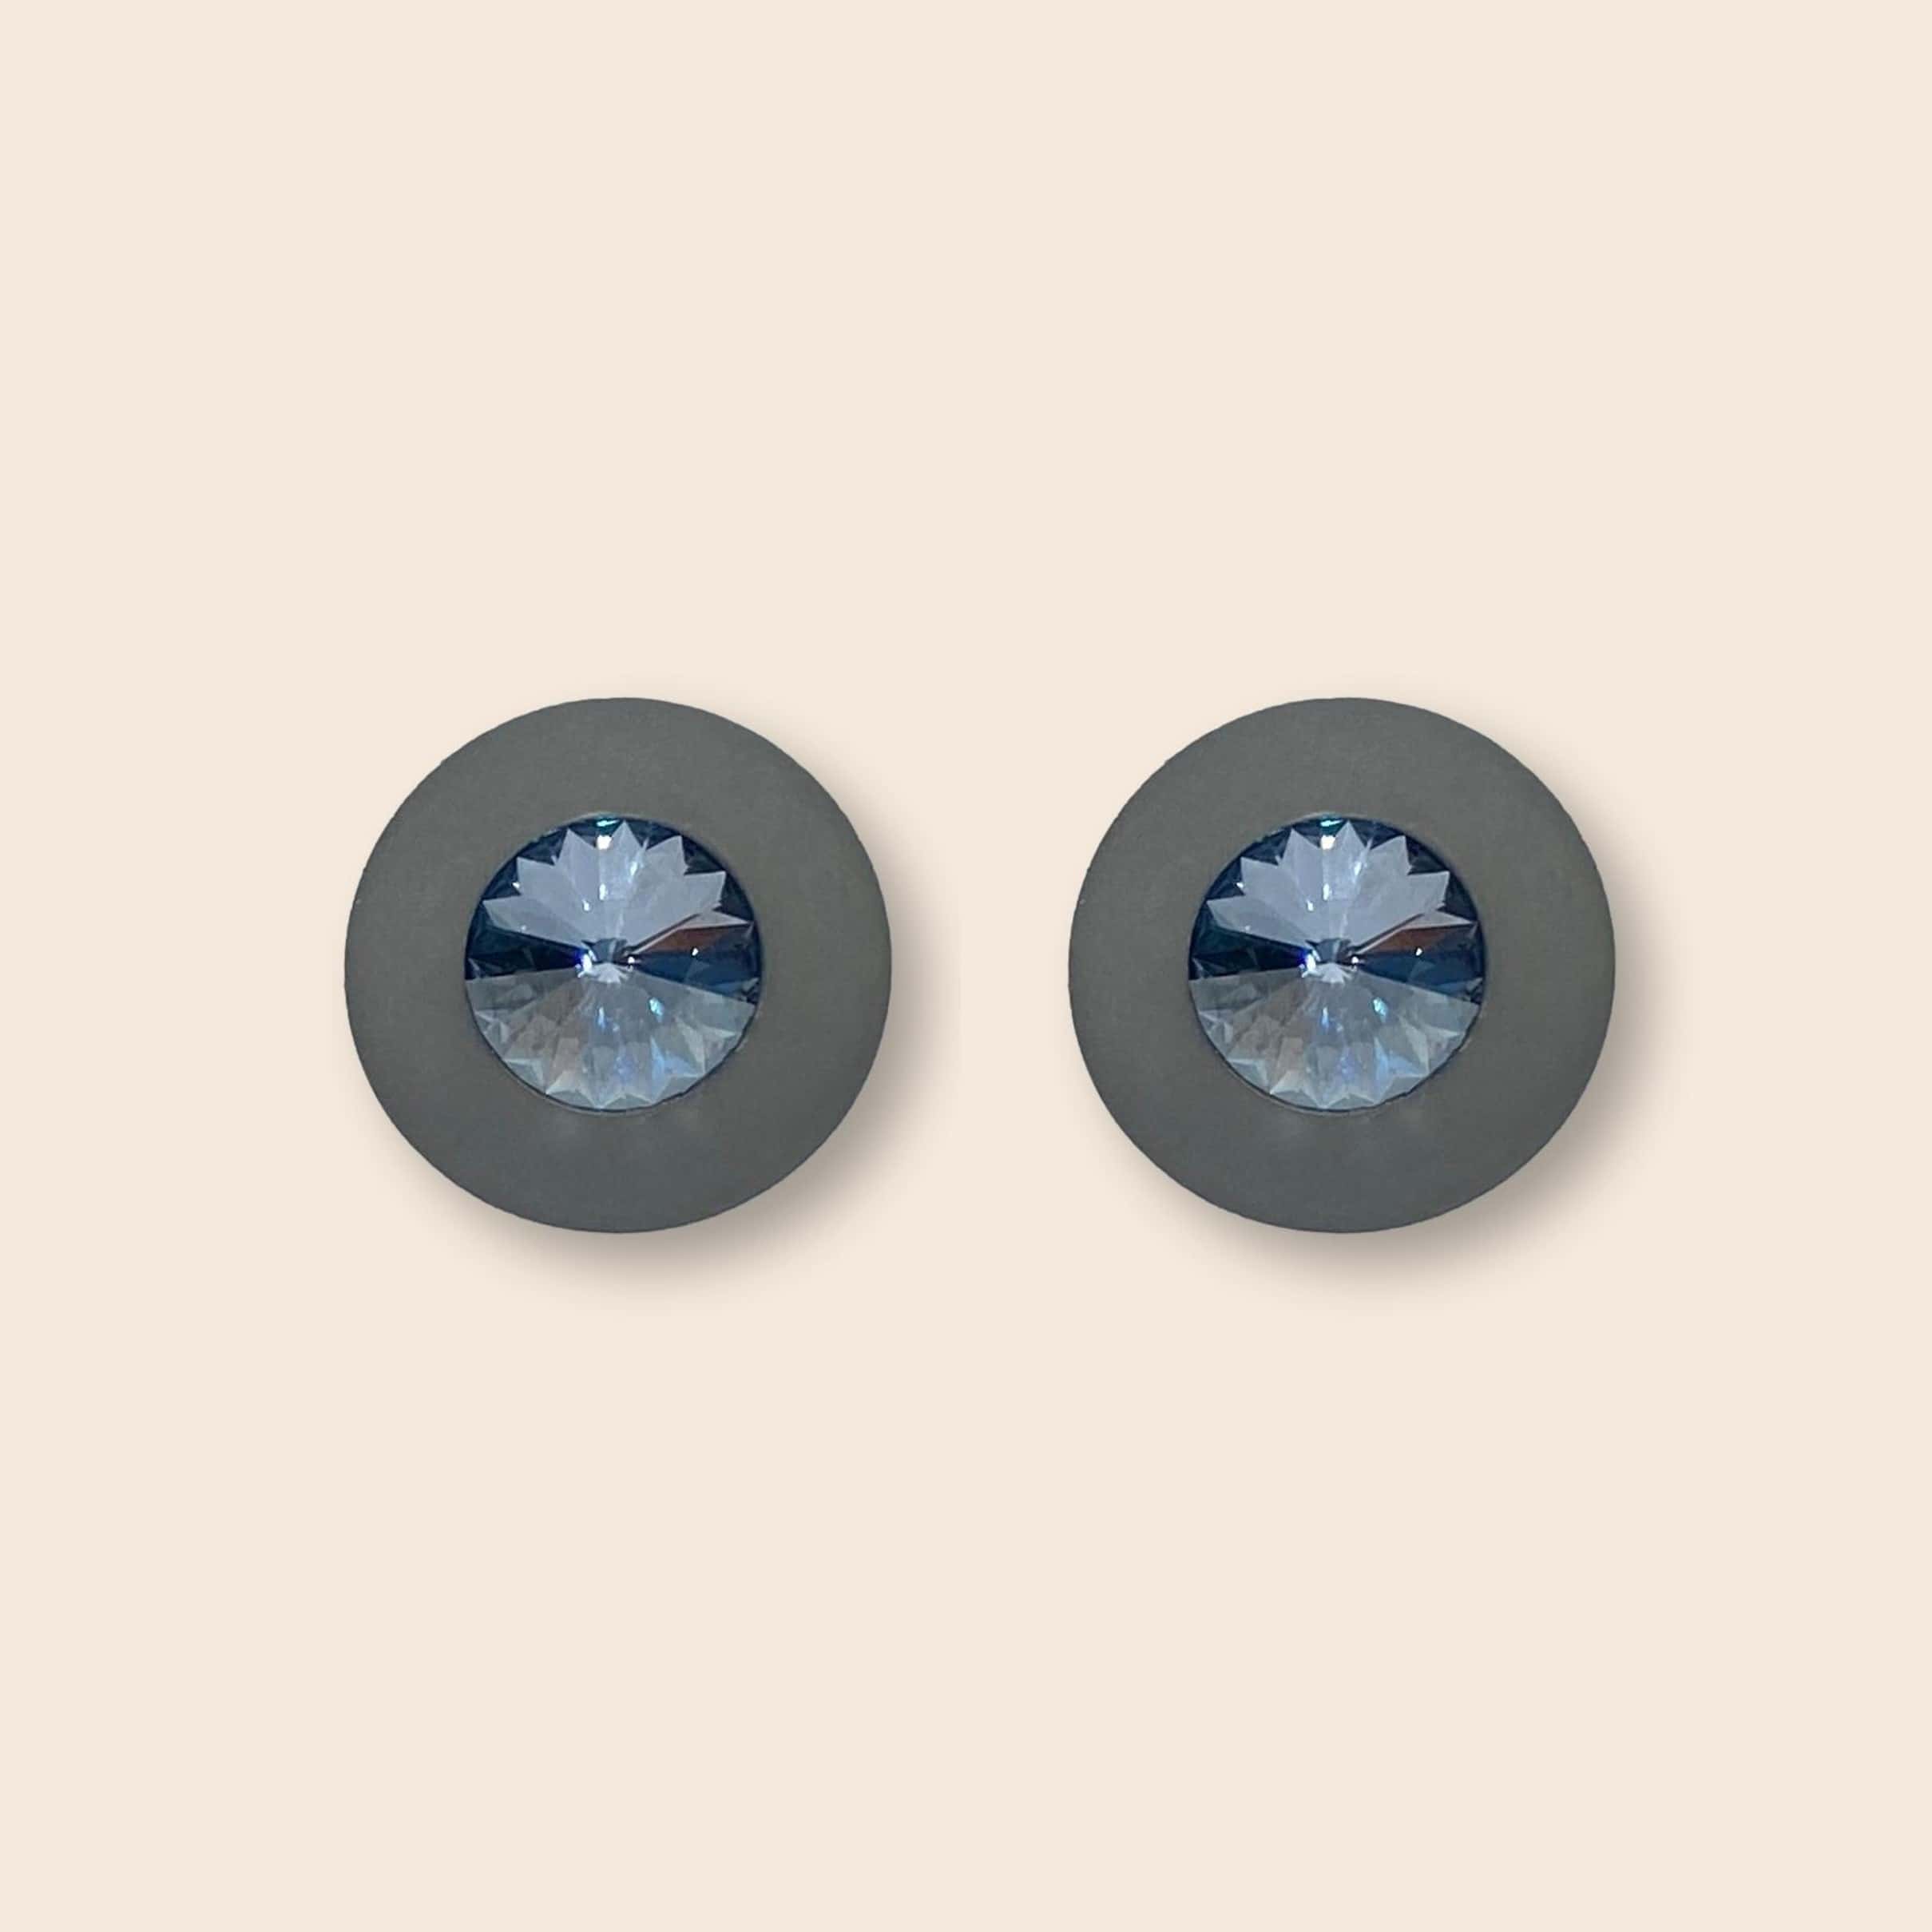 Coloristers Ohrstecker Sassari mit Kristallen in grau. Coloristers pin Earrings Sassari with crystals in grey.